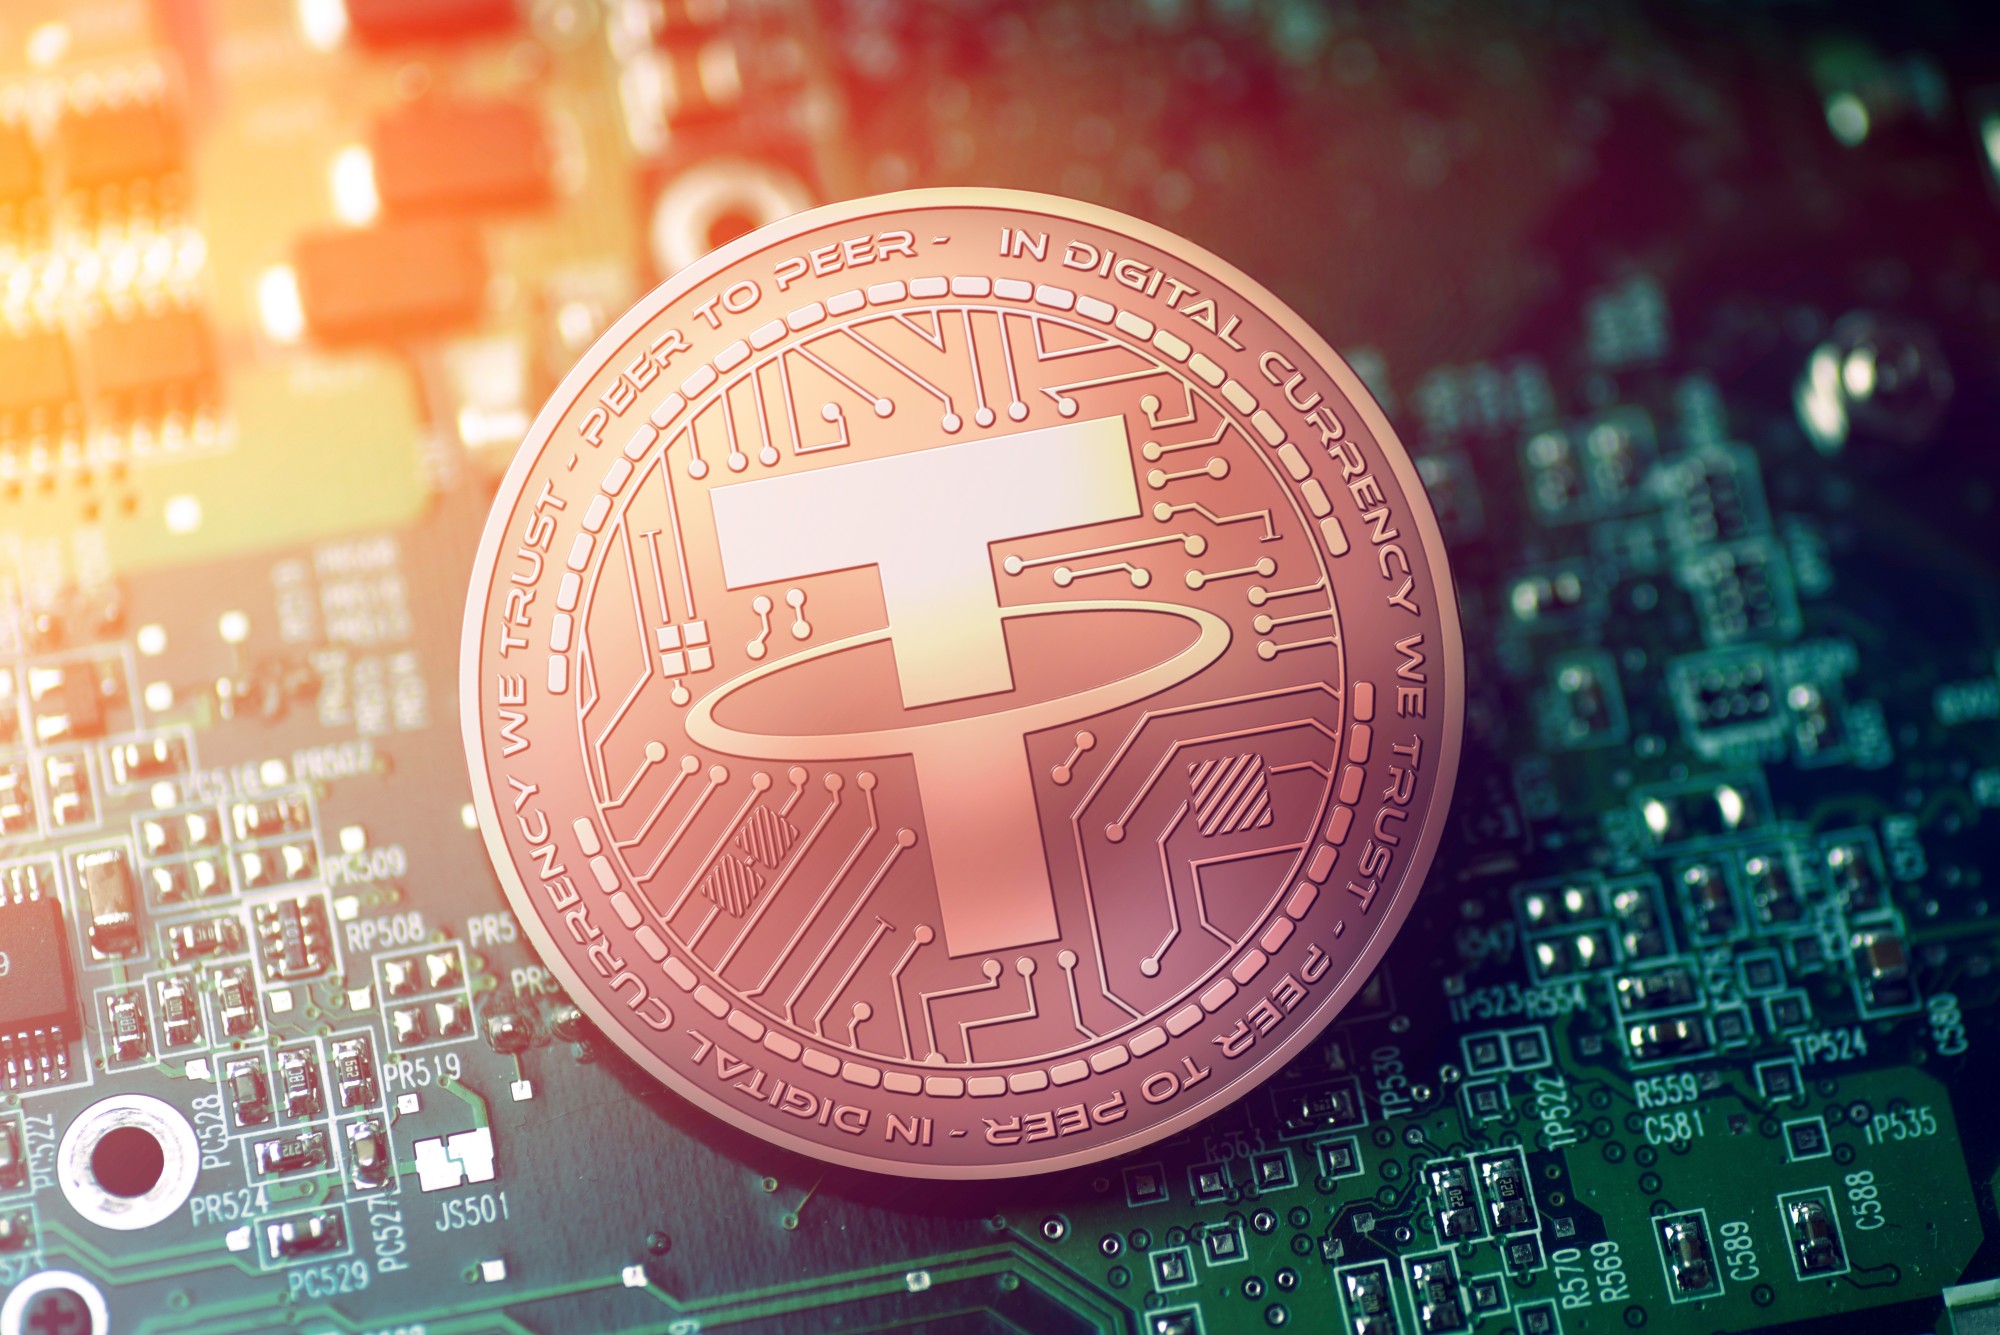  Tether:  It is considered a stablecoin, a cryptocurrency that is pegged to an external benchmark, typically the US dollar, to avoid large fluctuations in its price. Launched in 2014, Tether is claimed to be backed fully by US dollar reserves with its value being stabilized by a software buying selling both assets. Price: Rs 76.9. Mcap: USD 62 billion dollars; YTD: 13.3%.